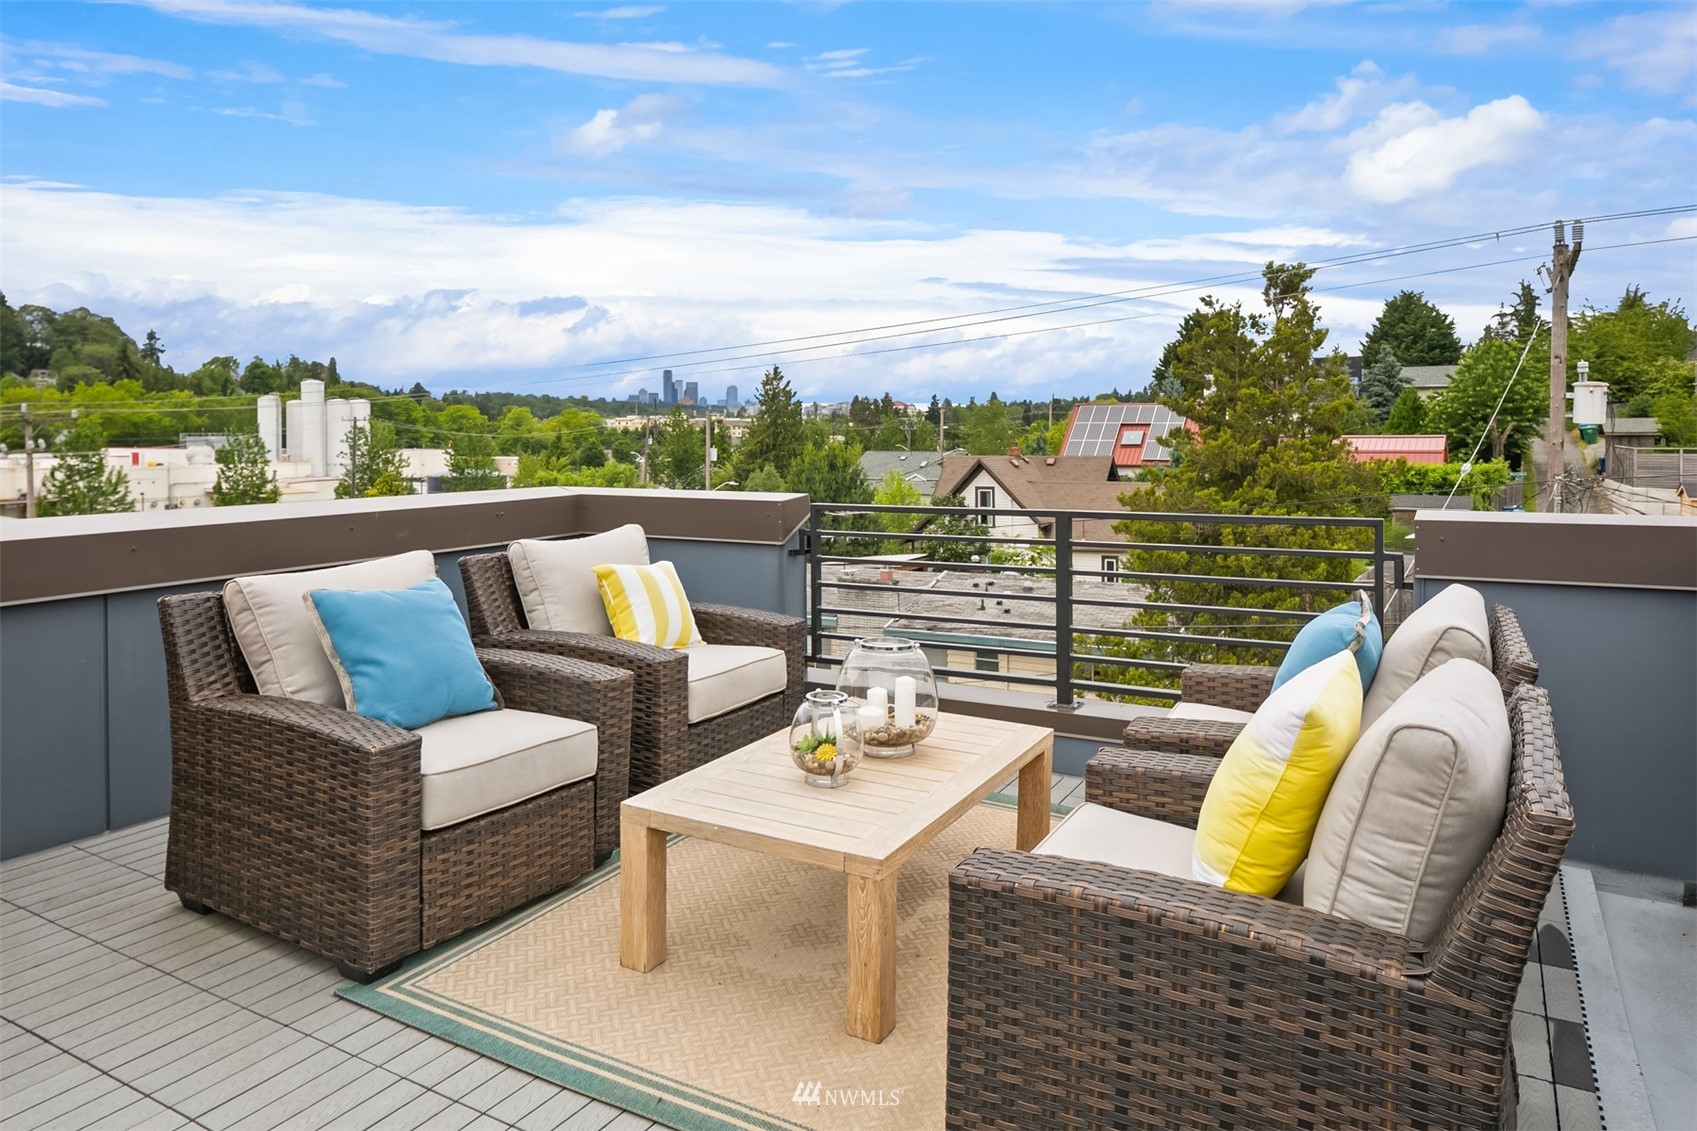 a view of roof deck with couches and city view